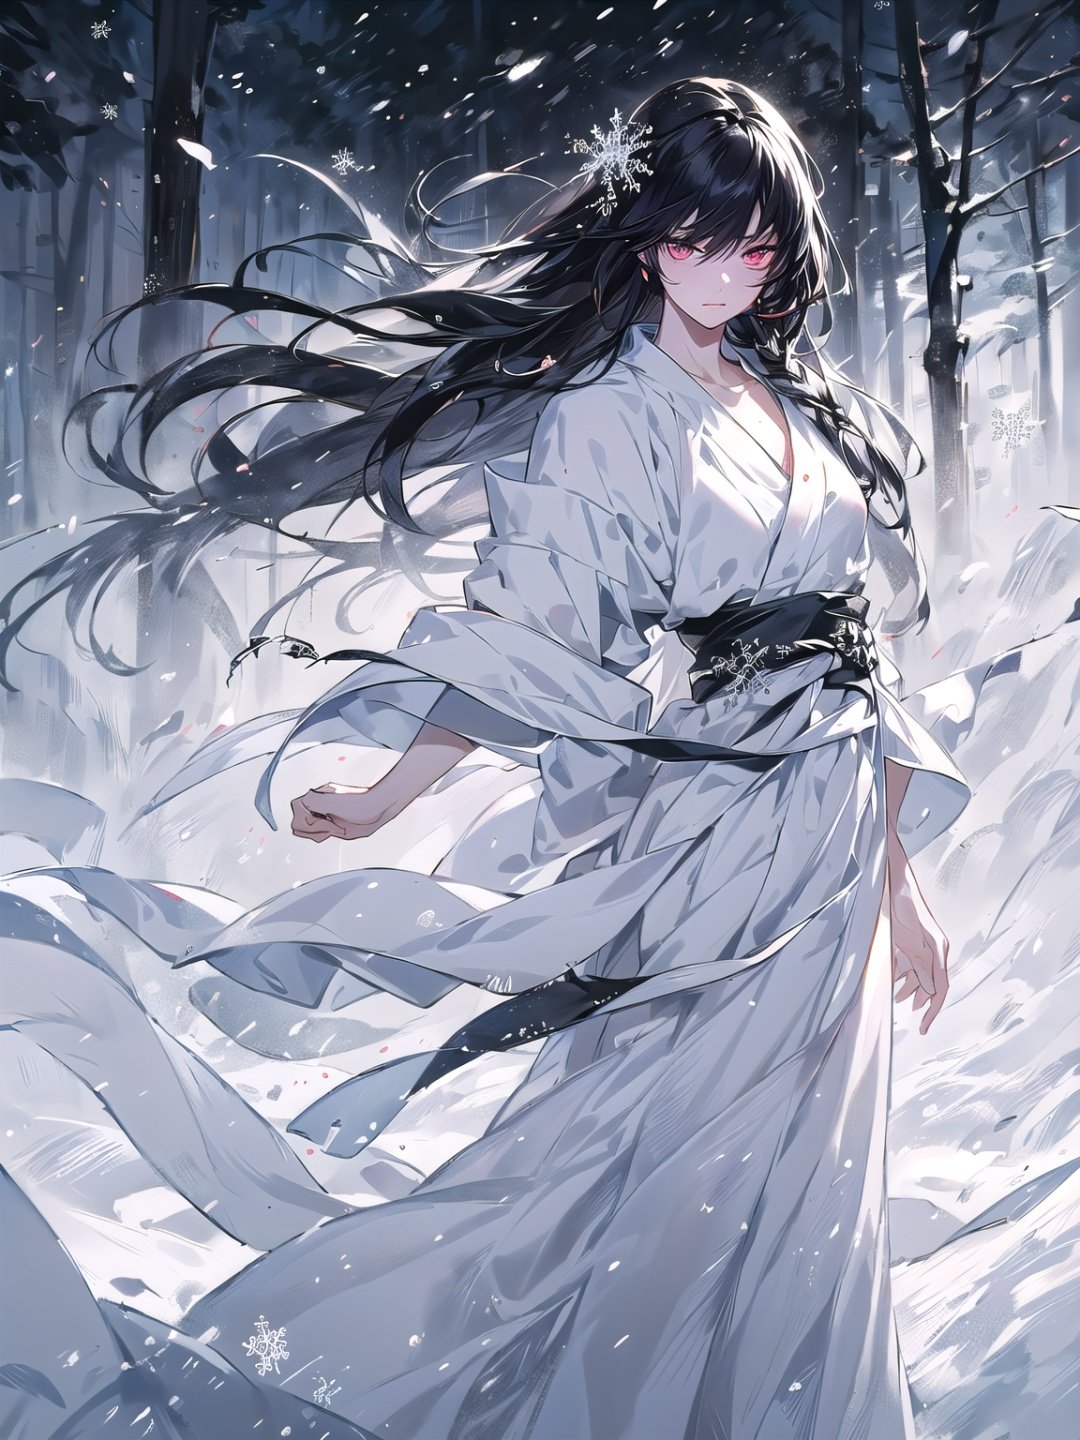 High quality, realistic, dark background, high-resolution, soft focus, (snowflake: 1.5), 1 girl, (mist: 1.5) (deep in the forest), (snowflake falling), (snowlight), (blizzard), (snowstorm), (ghost of a beautiful snowwoman, black long hair, white and silver bathrobes), anger, anger, melancholy, trembling black hair, shiny hair, glowing skin, beautiful and beautiful, charming, Chaos, Depth of Field, (Ghost: 1.5), (Lost in Anger, Forgetting Cold), (Arms Stretching Forward), (Monochrome: 1.5), (Black and White: 1.5)